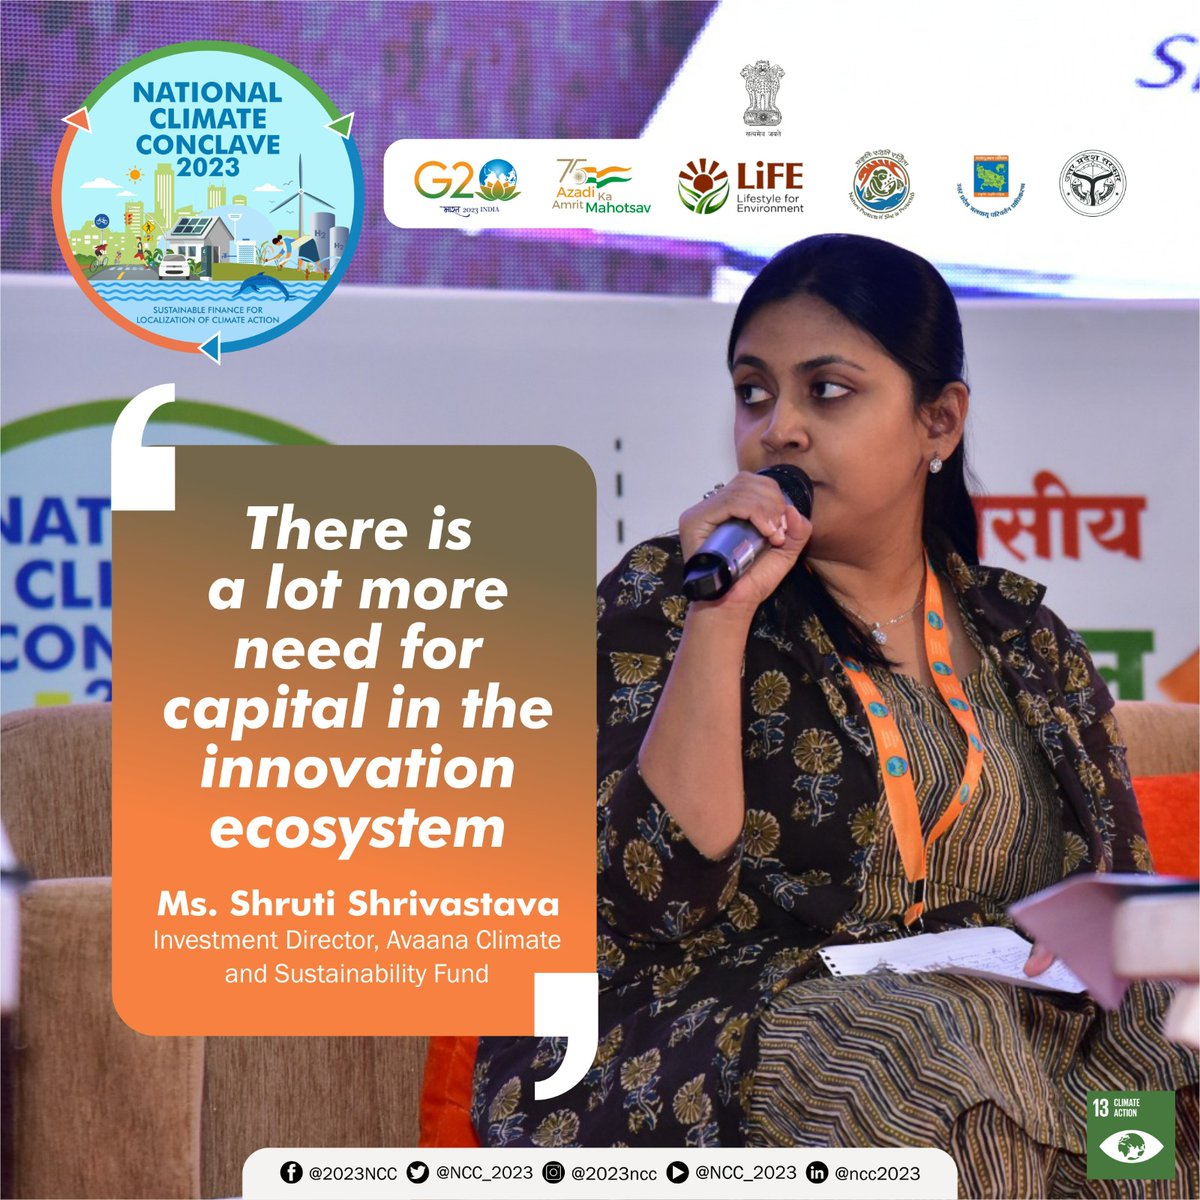 There is a lot more need for capital in the innovation ecosystem. Ms. Shruti Shrivastava, Investment Director, Avaana Climate and Sustainability Fund

#NCC2023
#LocalClimateAction
#ClimateSmartUP

@avaanacapital